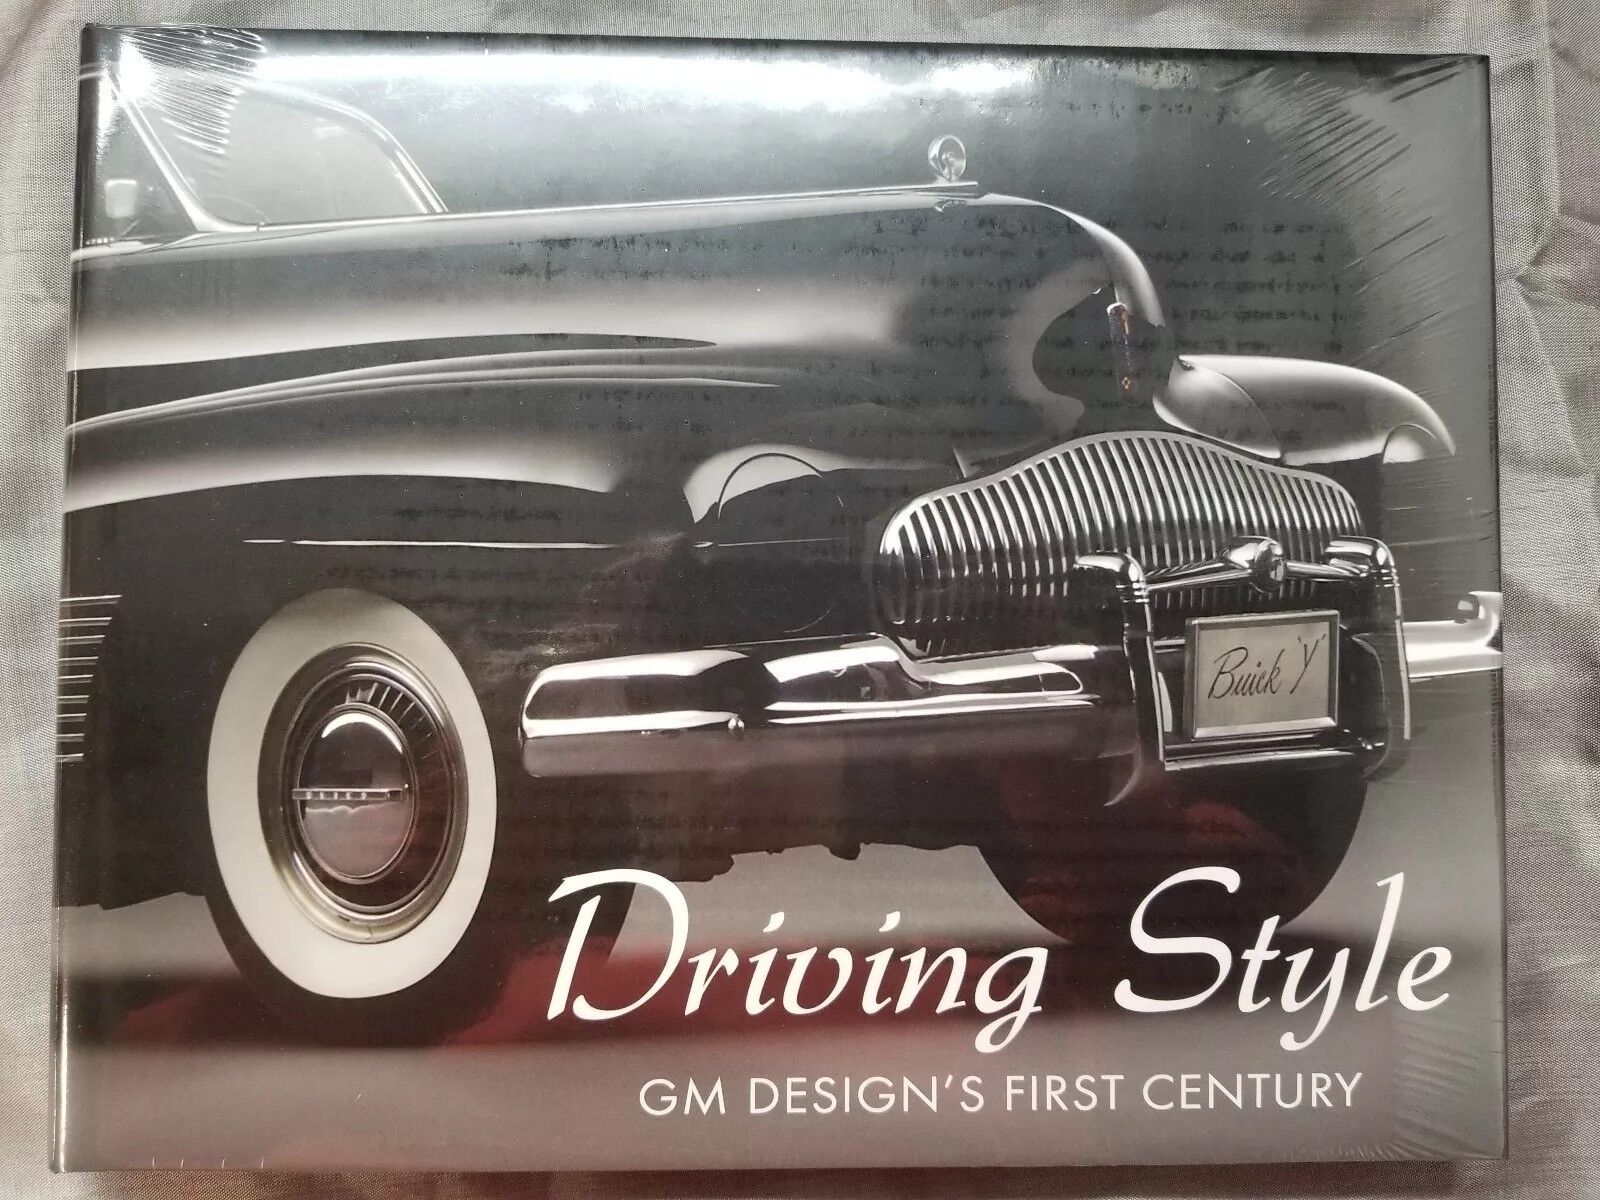 NEW Sealed Driving Style GM Design's First Century Man Cave End Table Book 